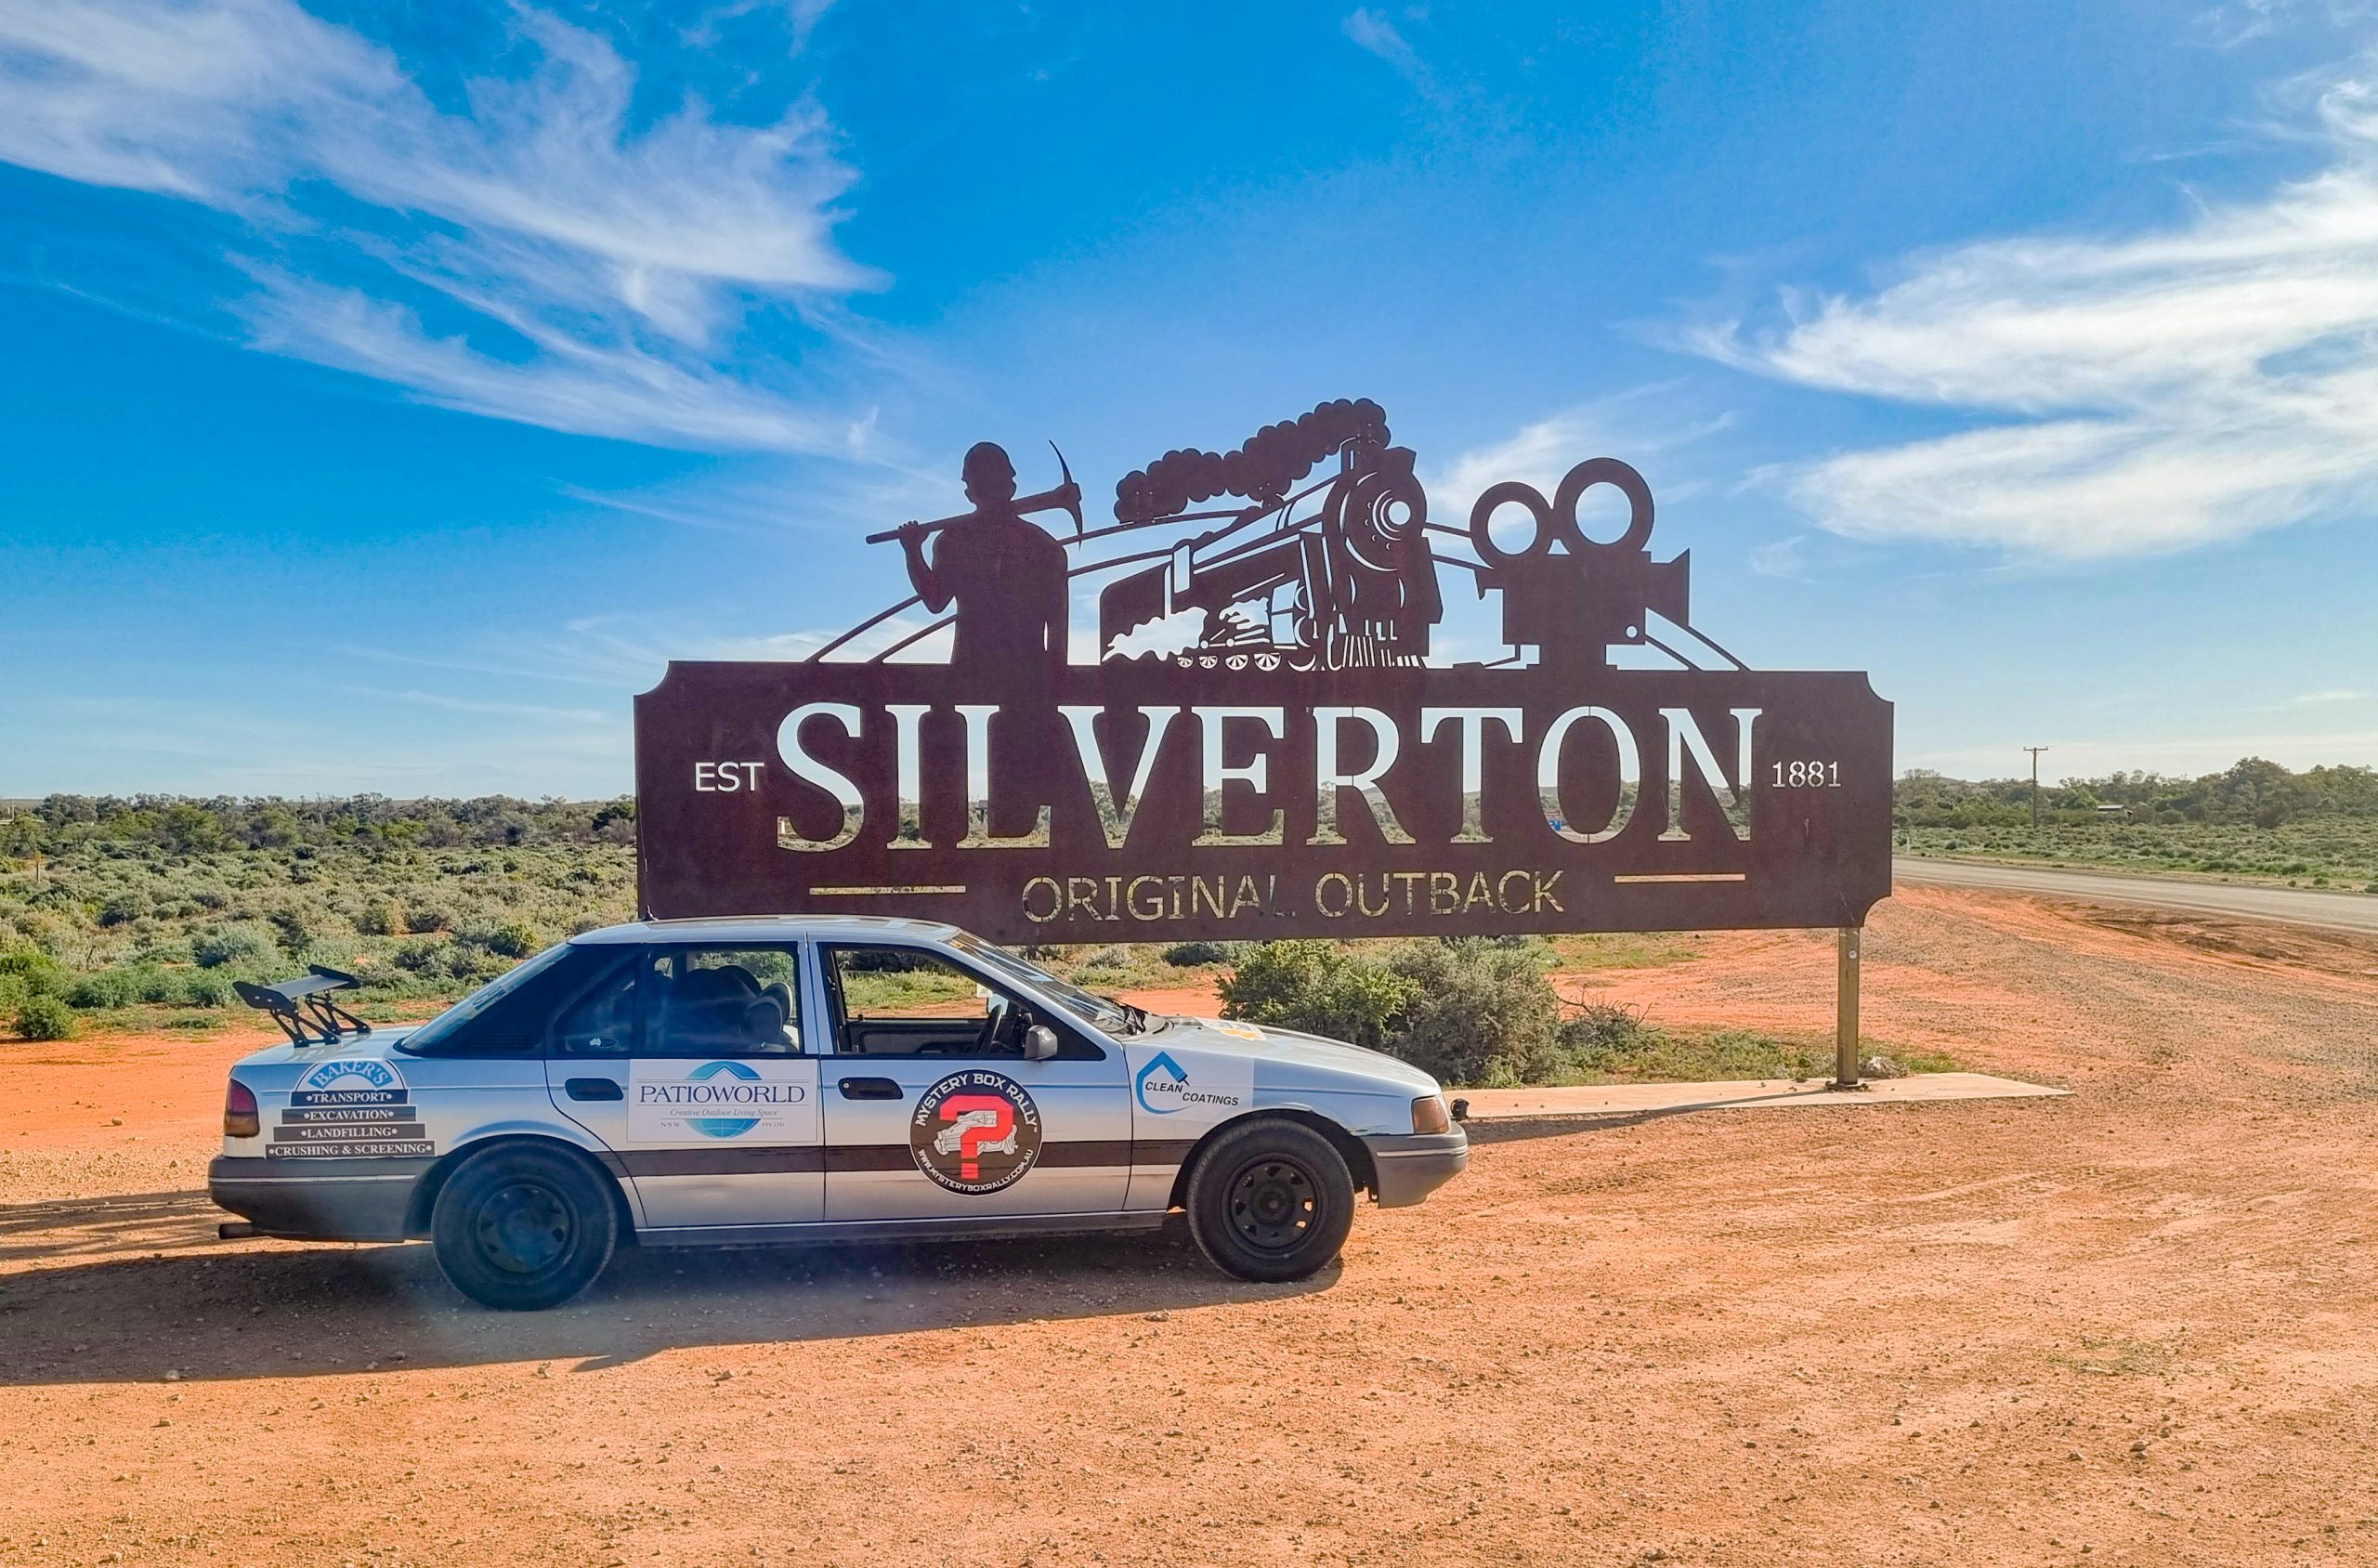 Tony Jacklin and Todd Small’s Team Big Boys’ rally car sits under the Silverton sign. It will drive along an unknown route today in Port Lincoln.